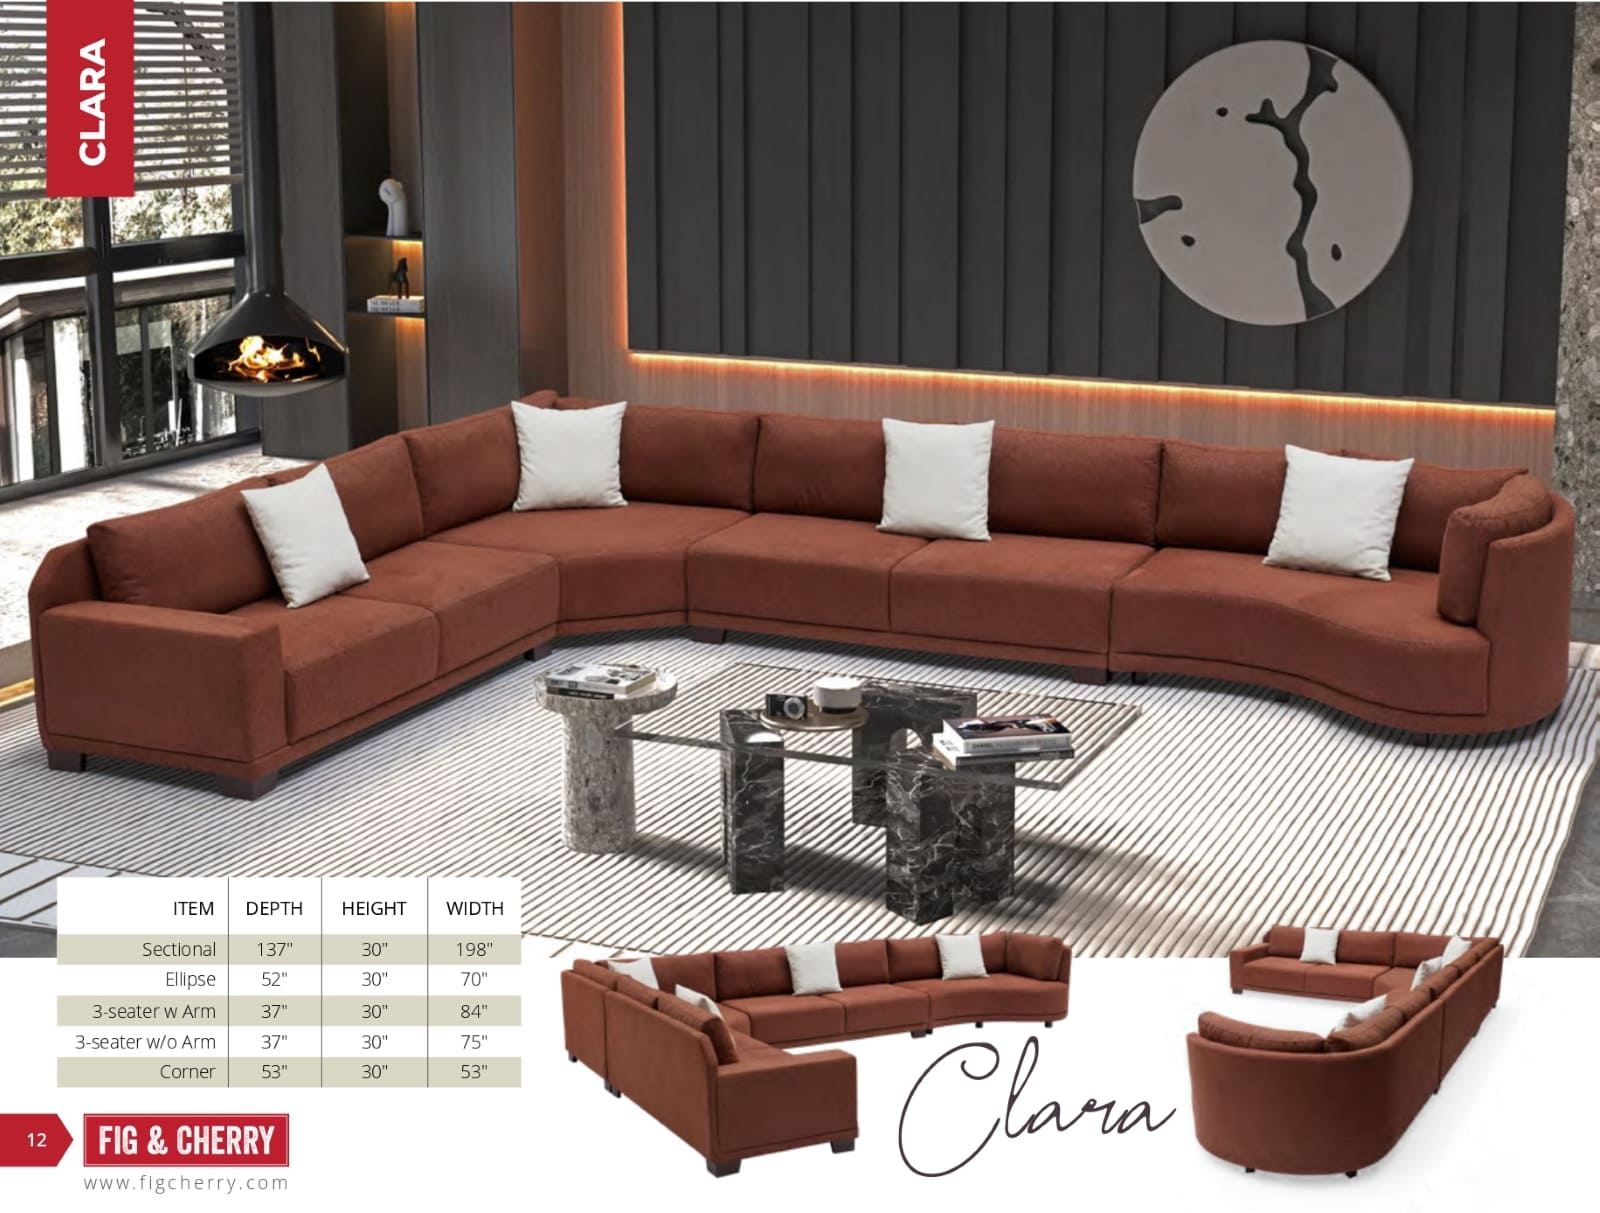 Fig & Cherry Indoor Collection (Sofas and Sectionals) Catalog (12)